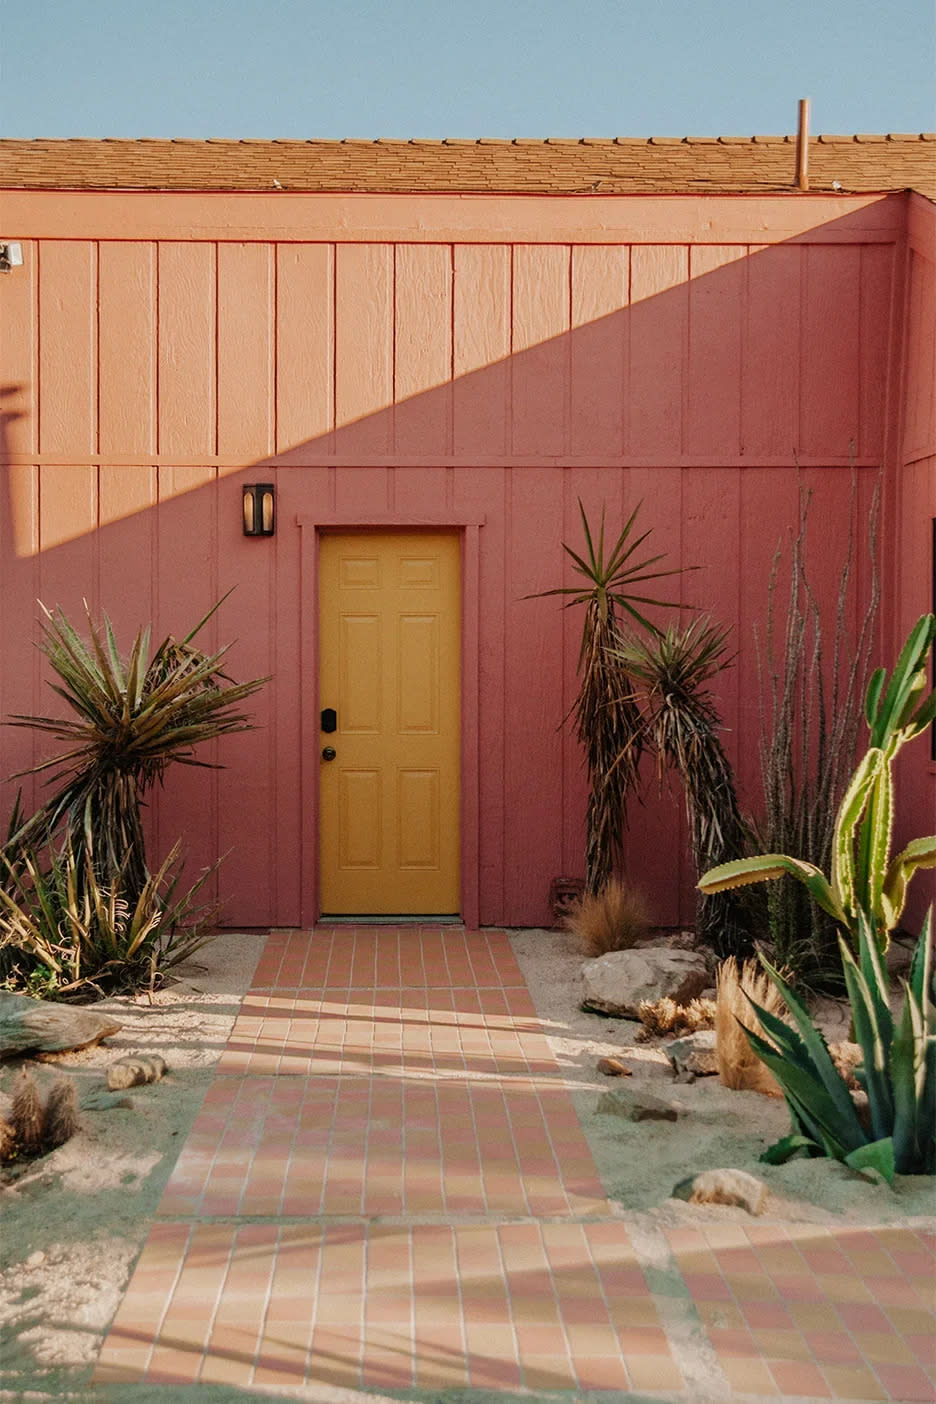 Desert home exterior painted pink with a yellow door.